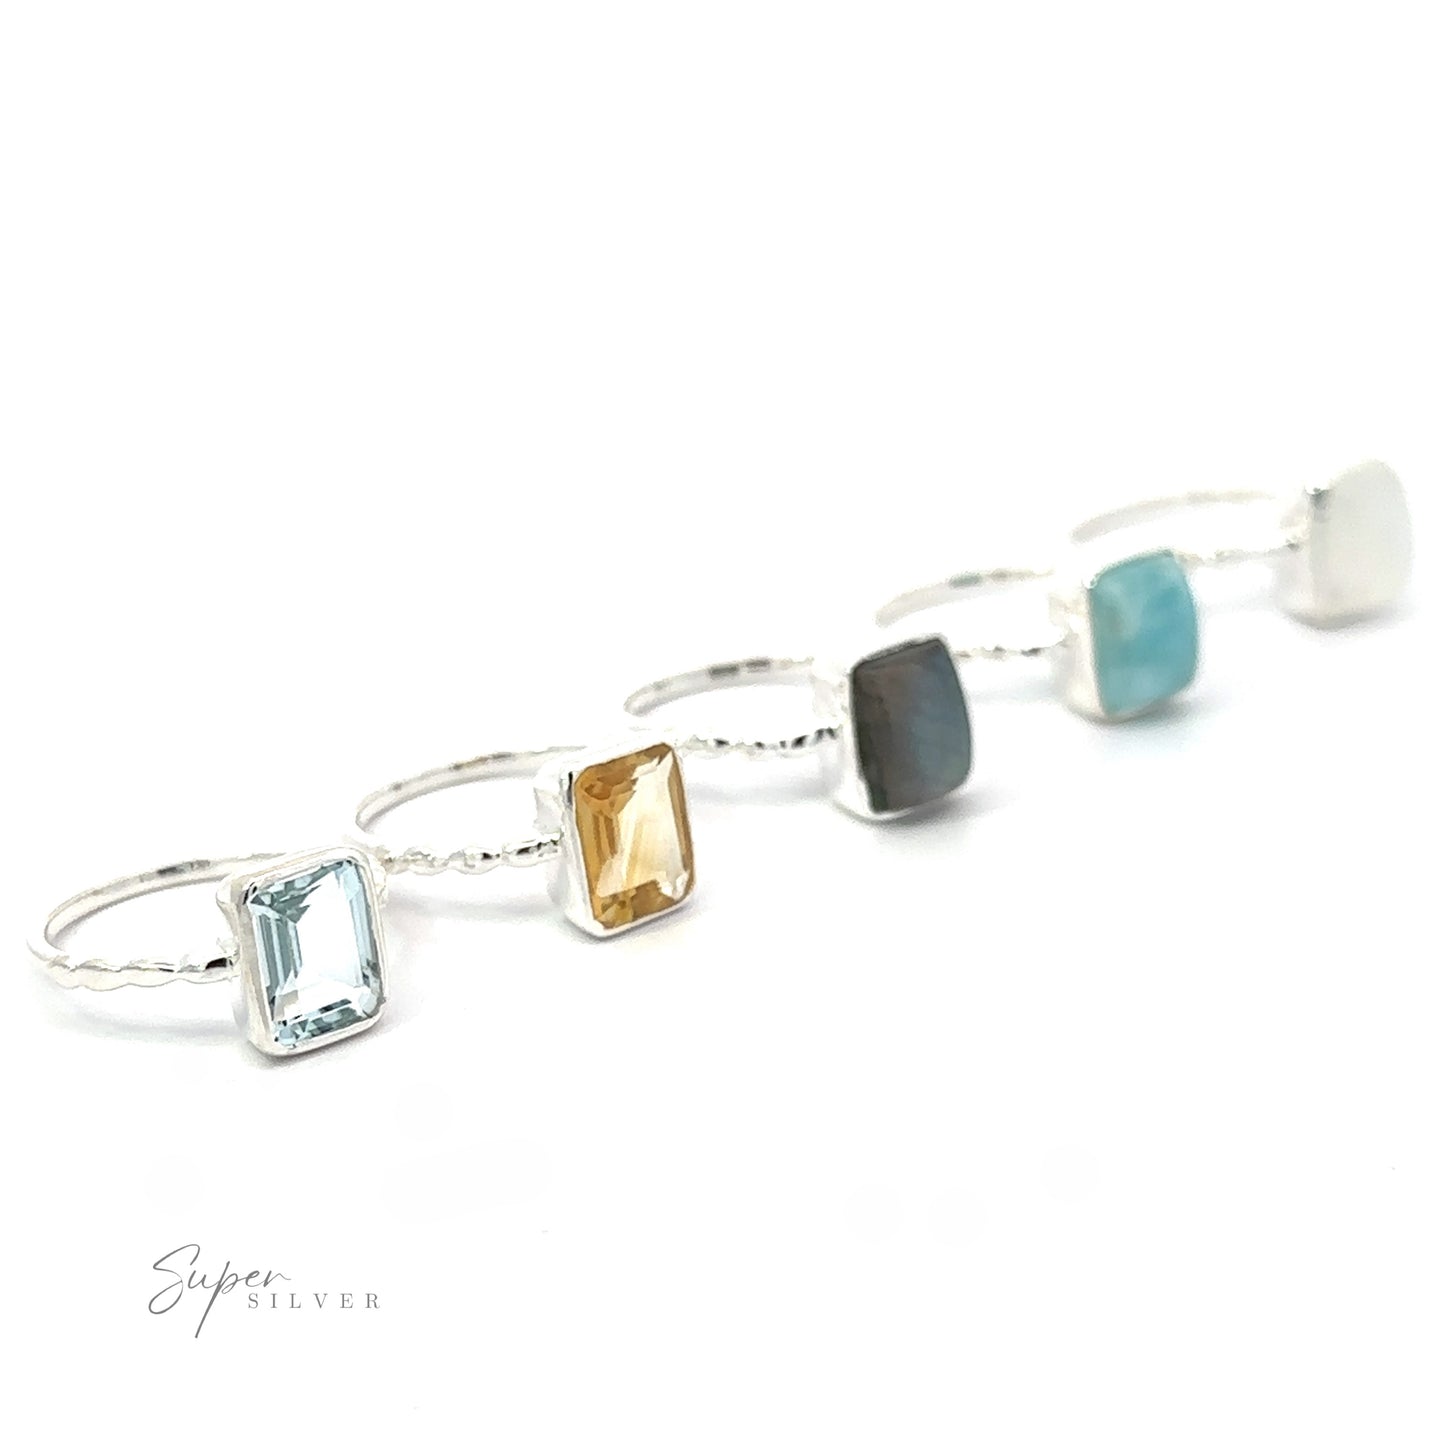 A collection of Rectangle Gemstone rings with Beaded Bands displayed against a white background.